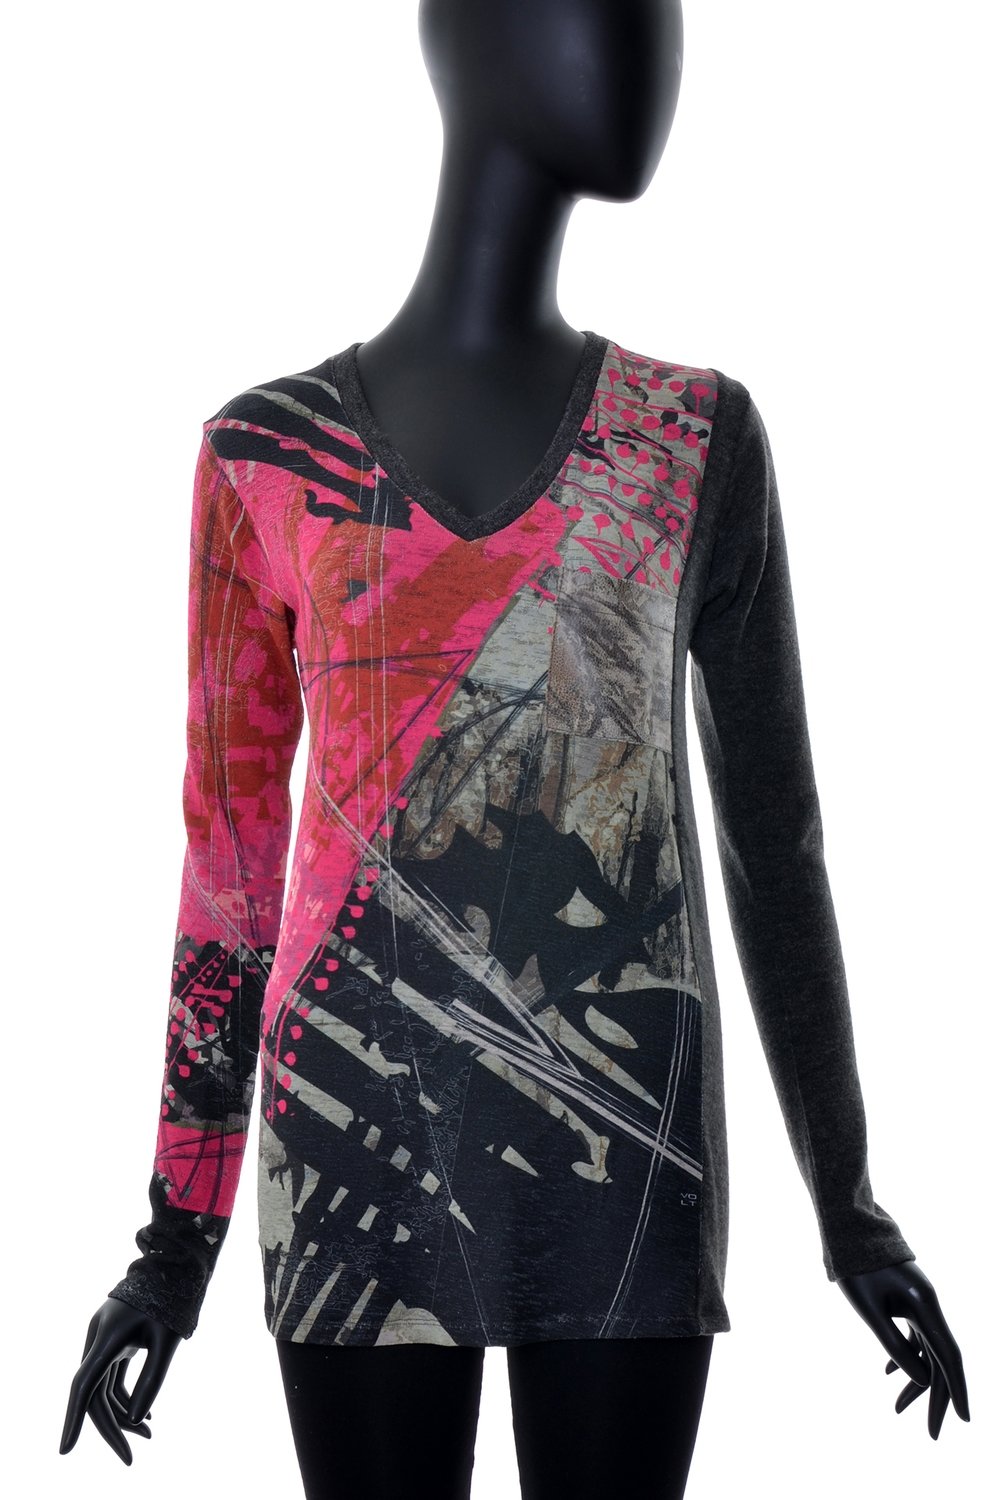 Volt Design: Pink Forest Abstract Art Tunic SOLD OUT - Wild Curves